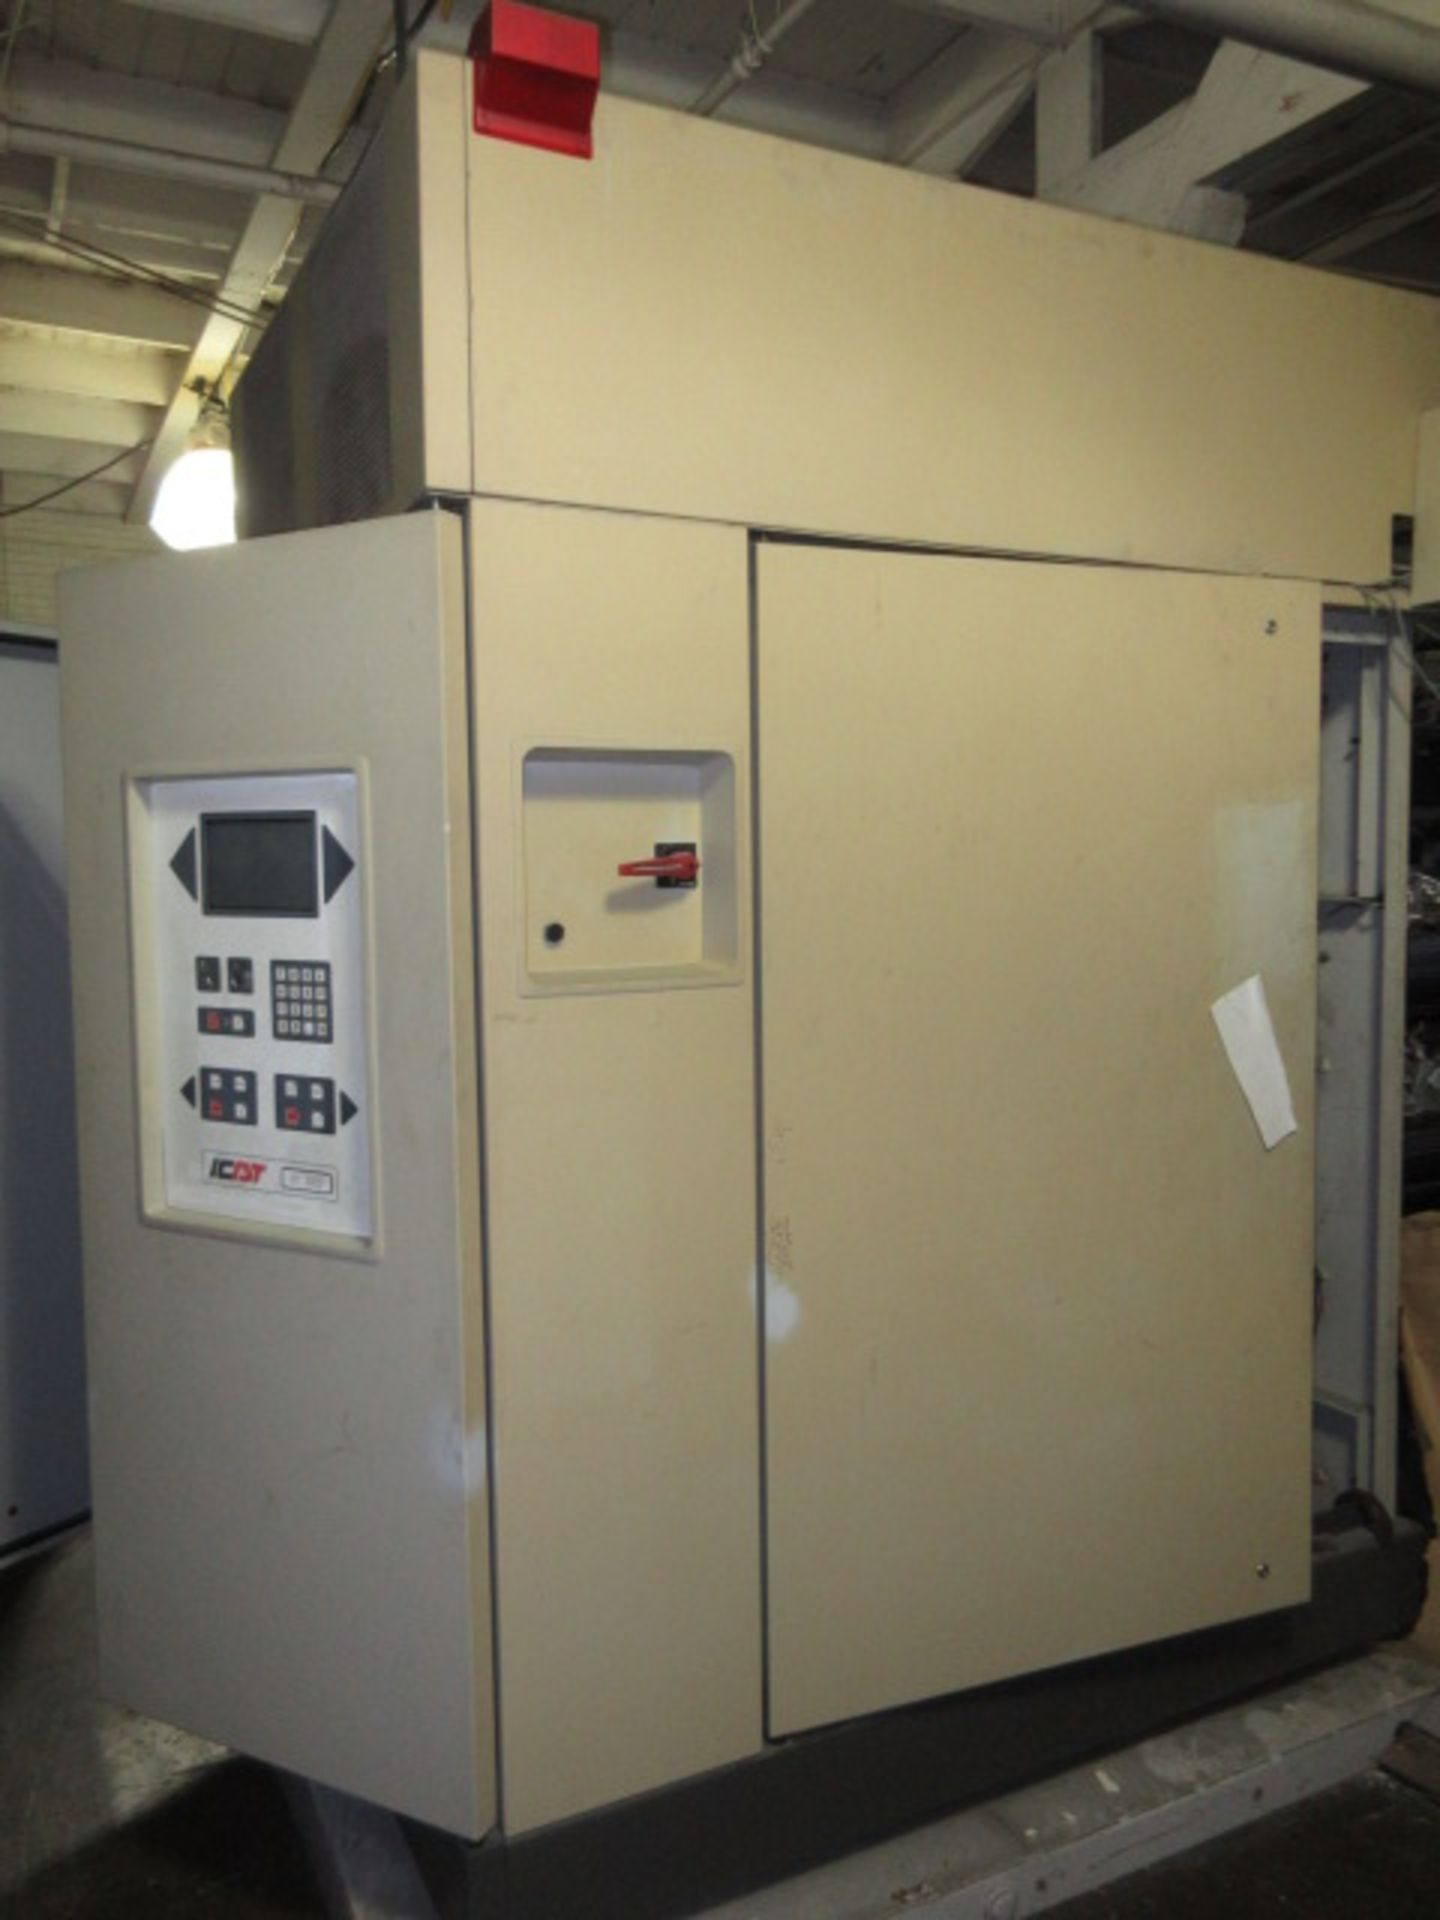 ICBT FT15-E3 HT Sample Texturing Machine, (1996), parted out, not in running condition, please - Image 4 of 7